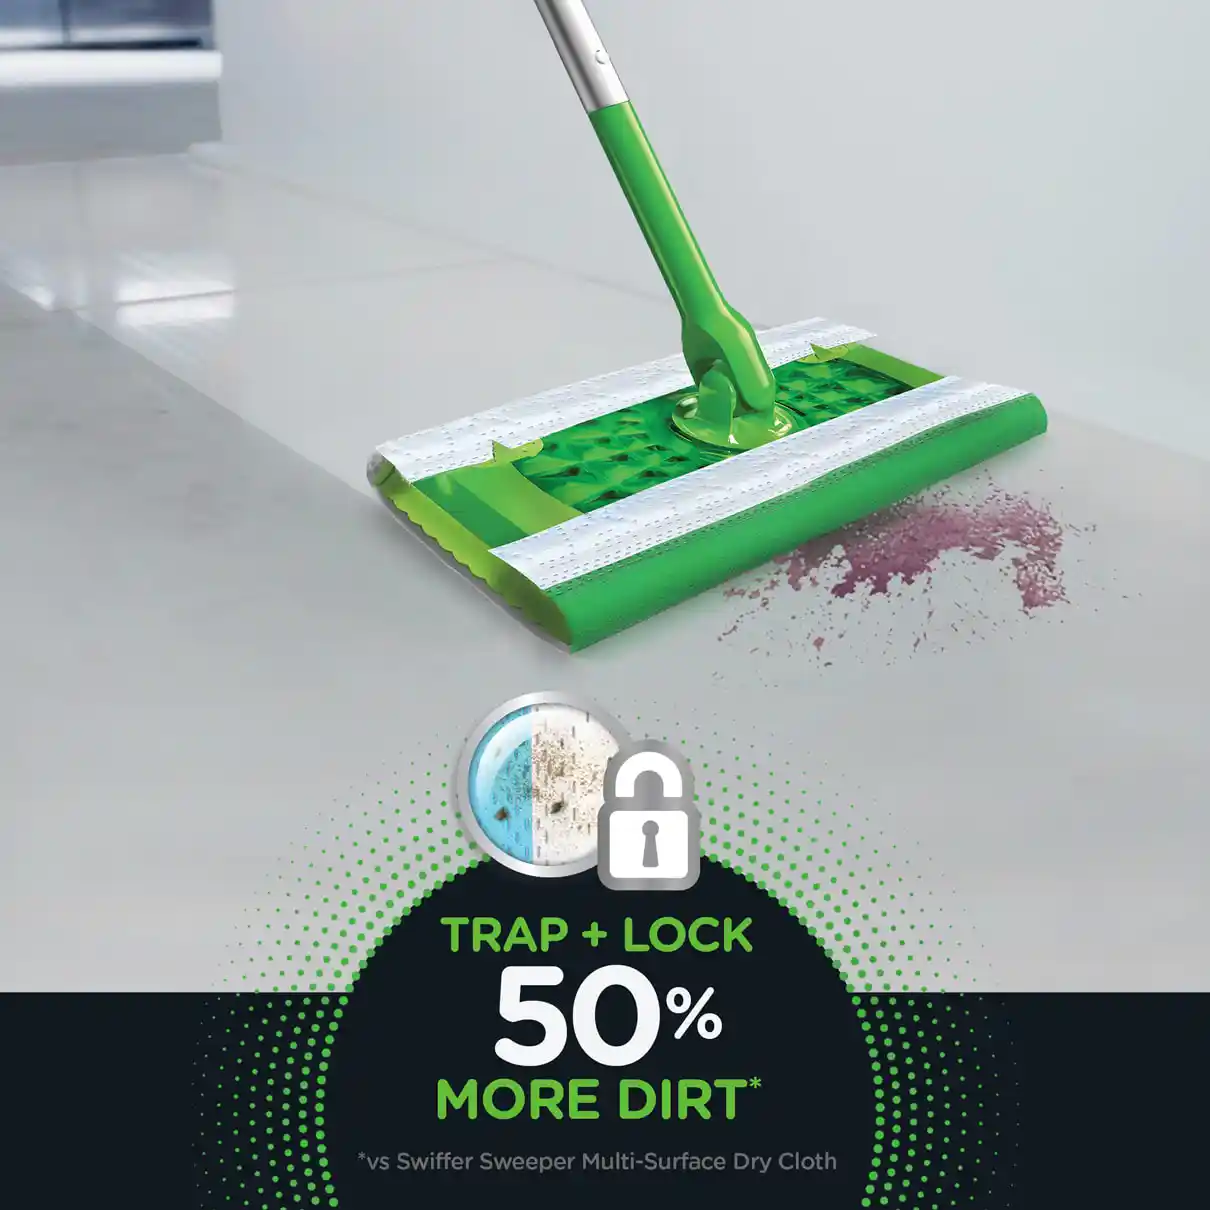 Swiffer® Sweeper™ Heavy Duty Multi-Surface Wet Cloth Refills for Floor  Mopping and Cleaning, Gain scent